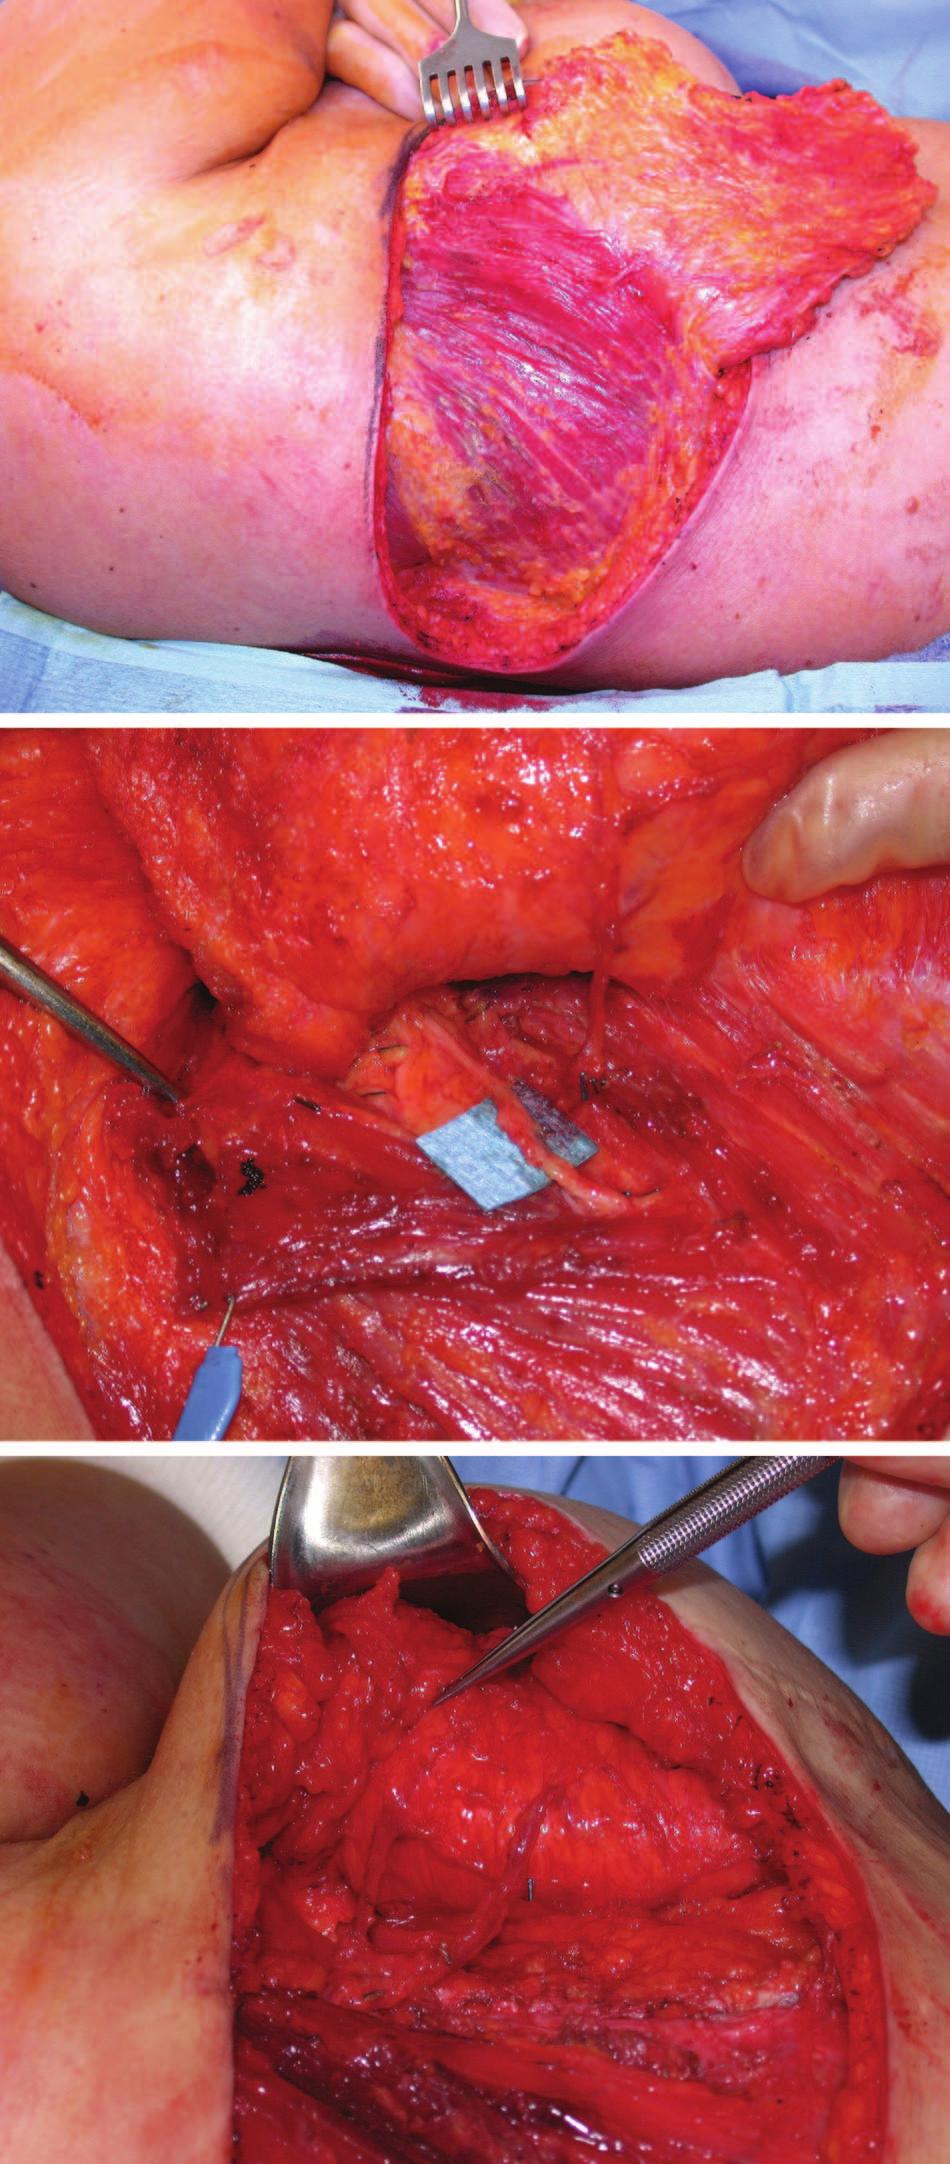 764 PLASTIC AND RECONSTRUCTIVE SURGERY, September 1, 2005 FIG. 3. The defect is closed primarily and the drain is placed.